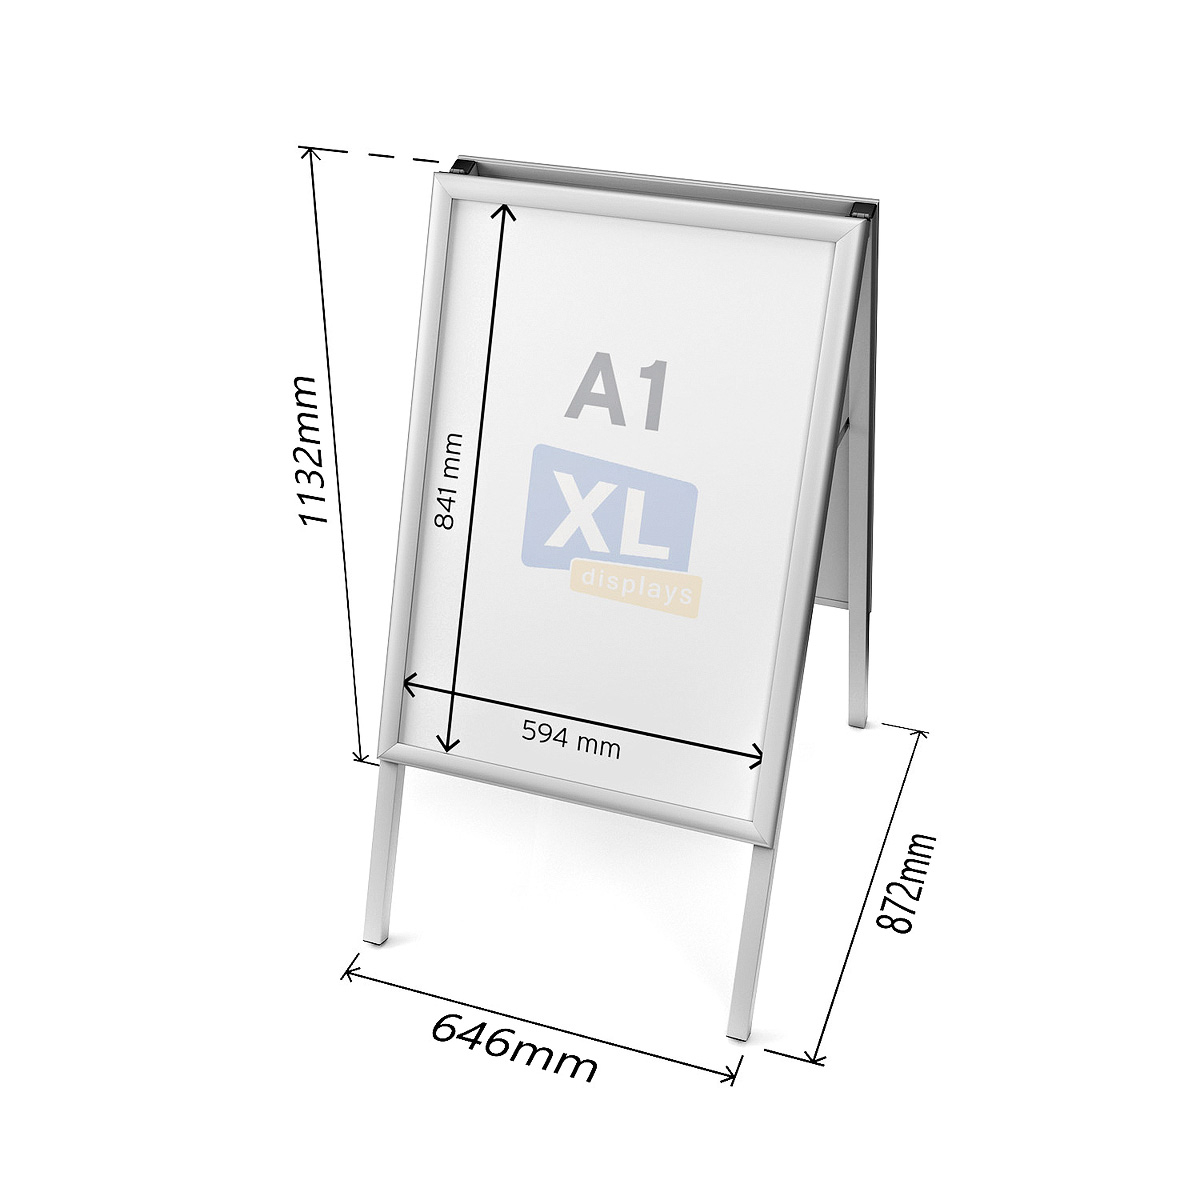 Dimensions of ECO-LITE Folding A-Frame Sign Board A1